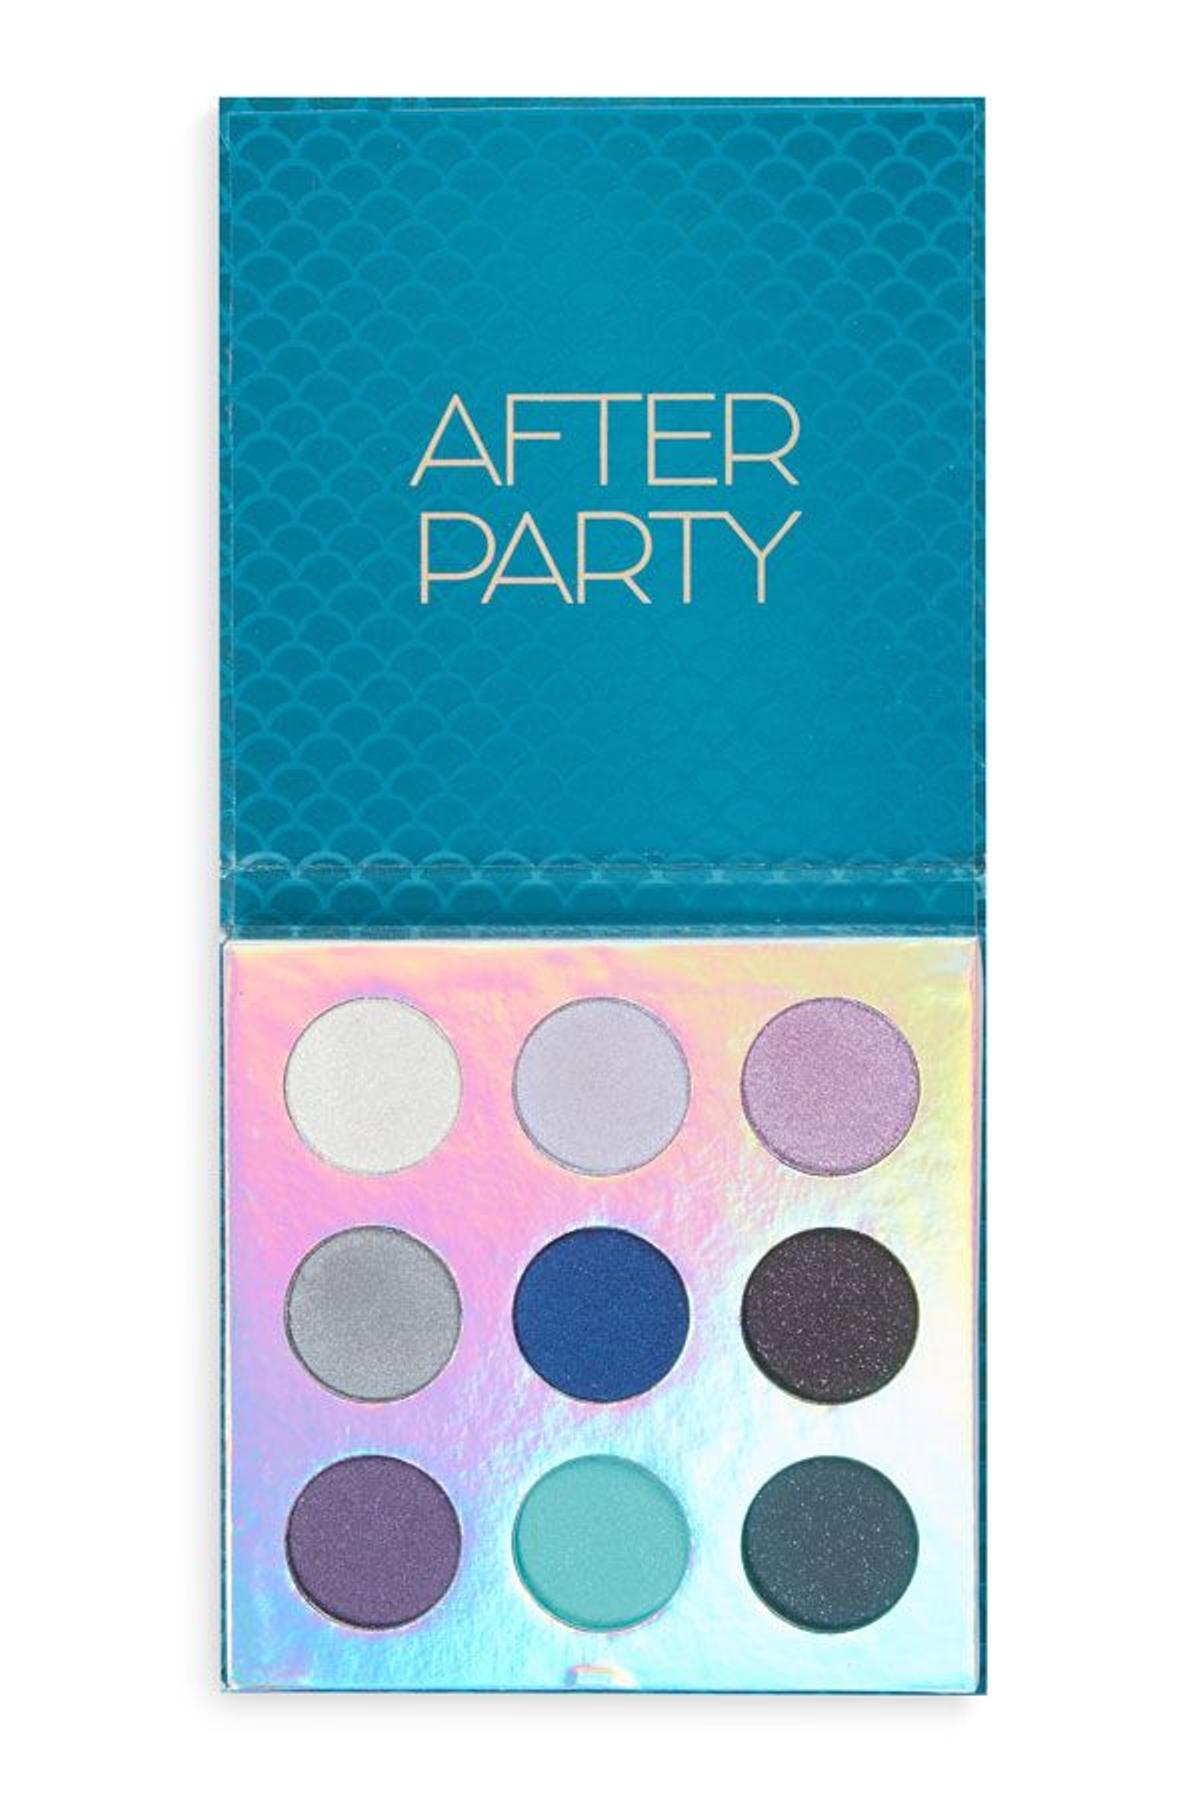 After Party Eyeshadow, Primark